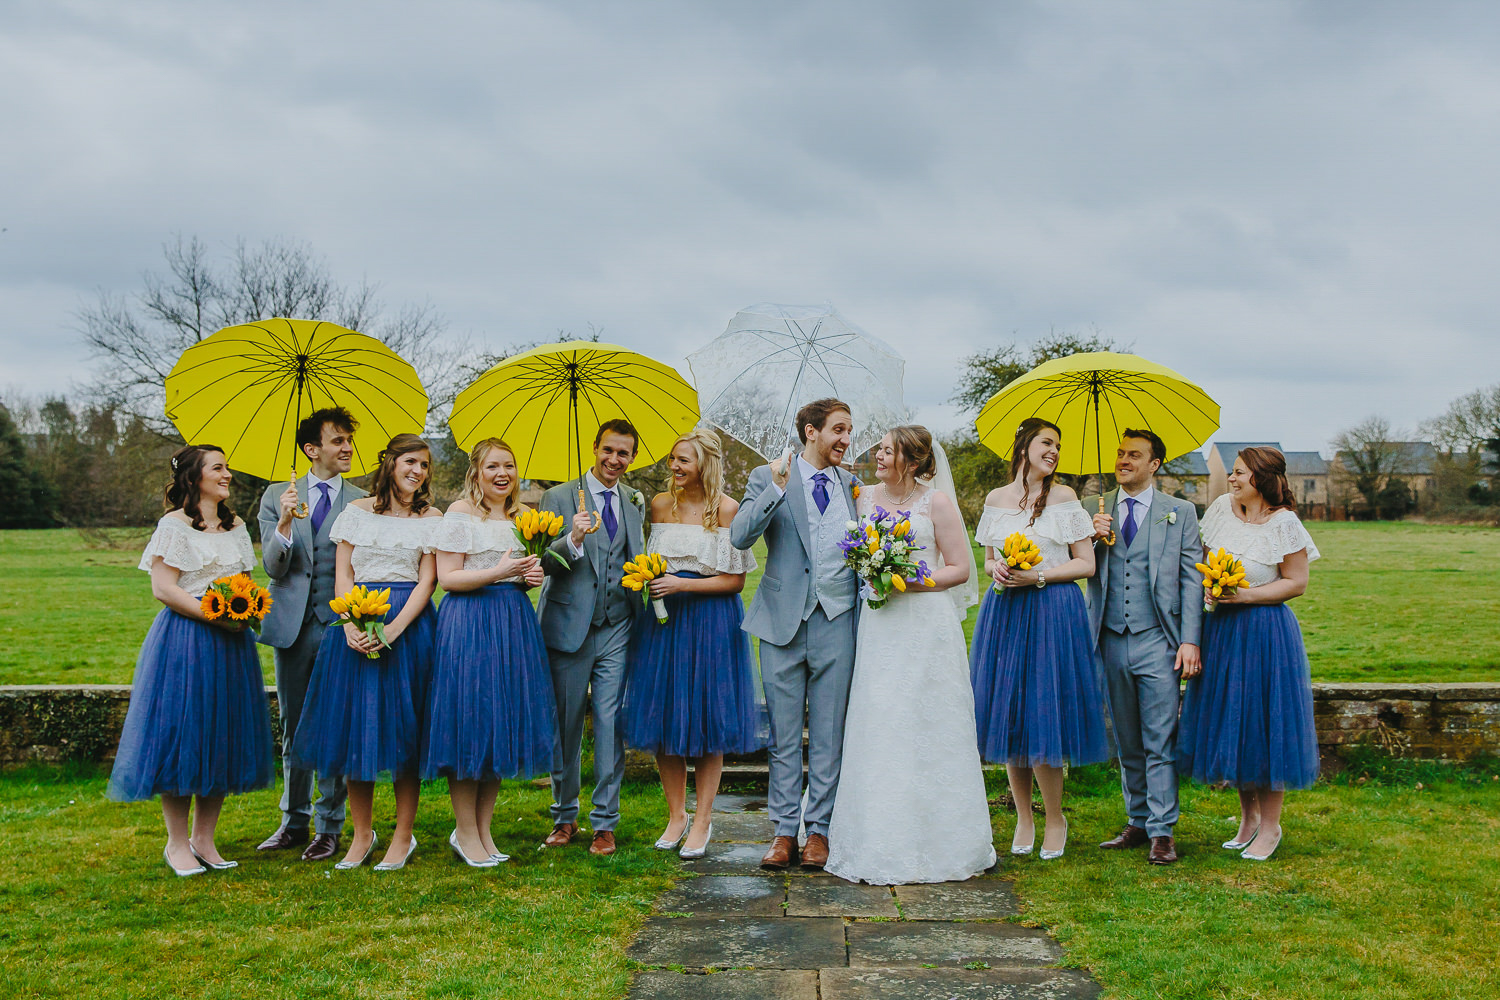 Bride, groom, bridesmaids and ushers with yellow umbrellas